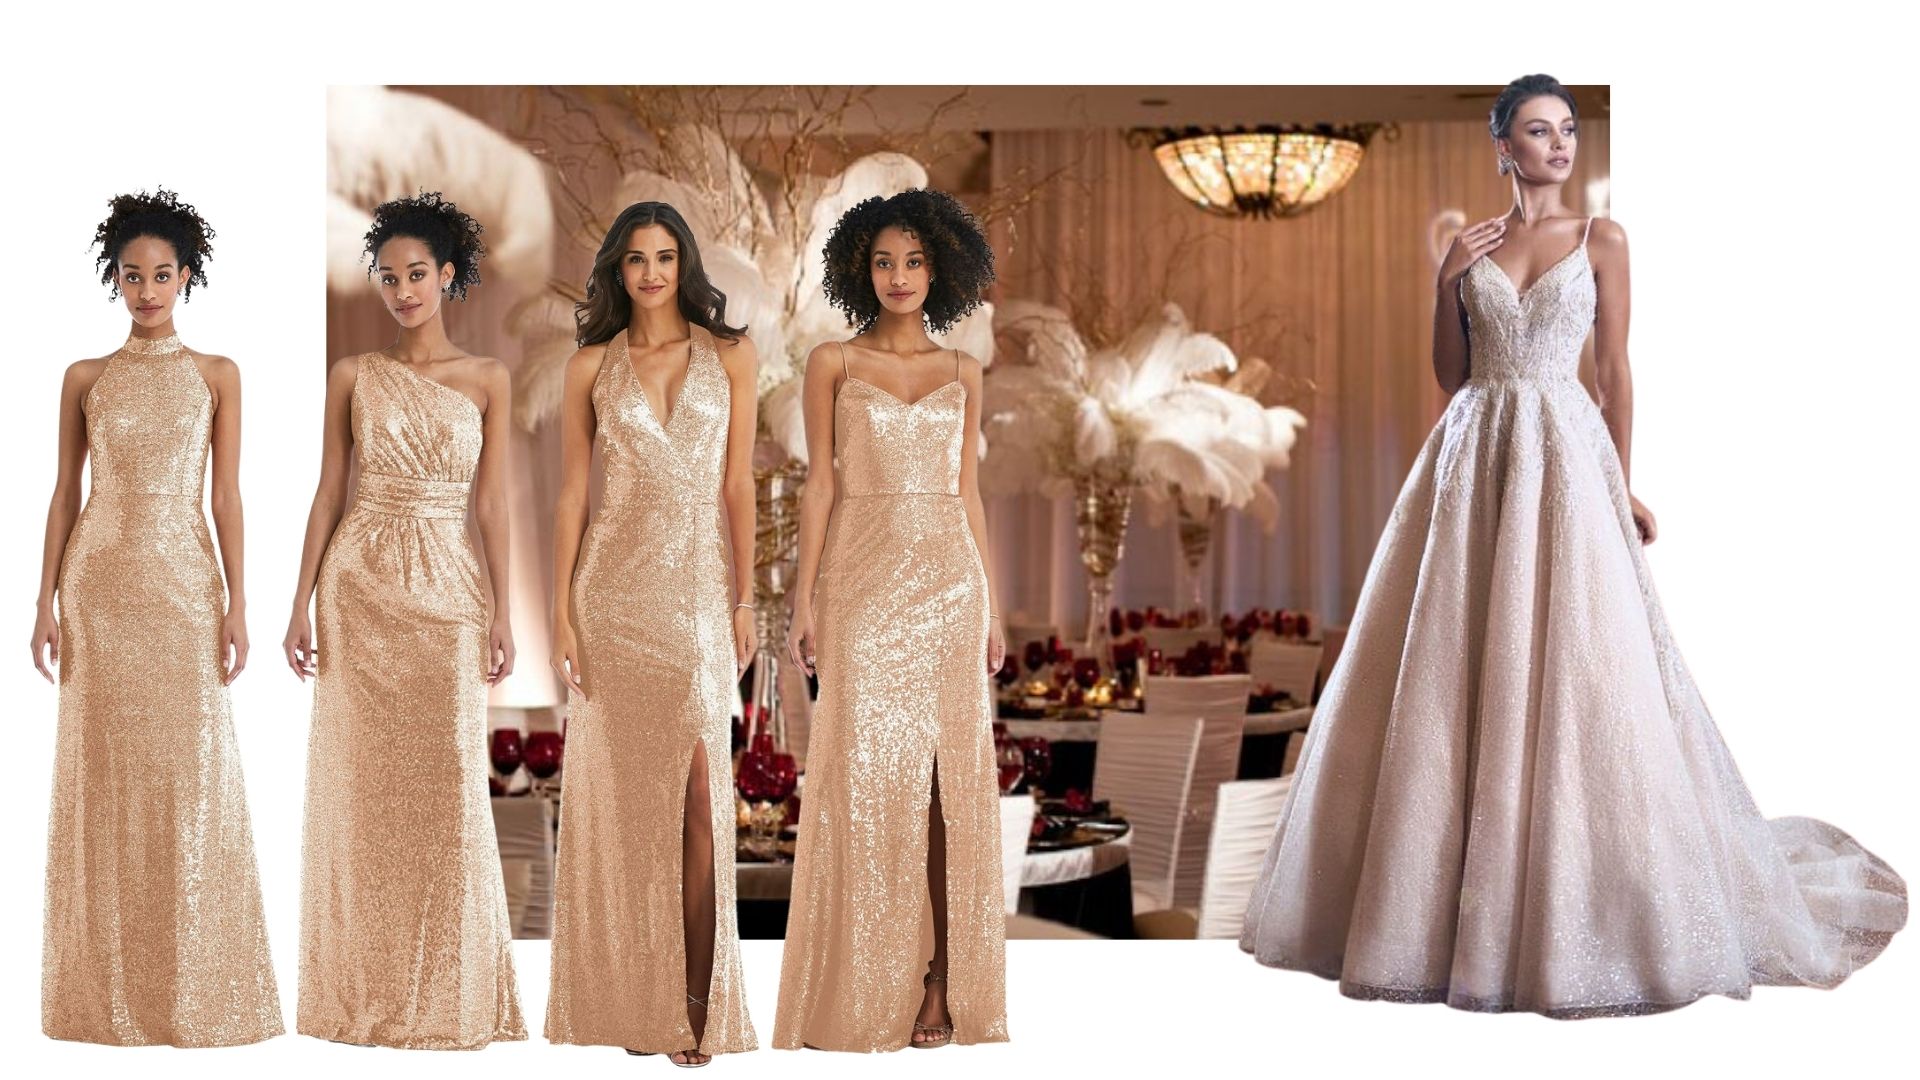 Gold Sequin Bridesmaid Dresses - Old Hollywood Glamour Wedding